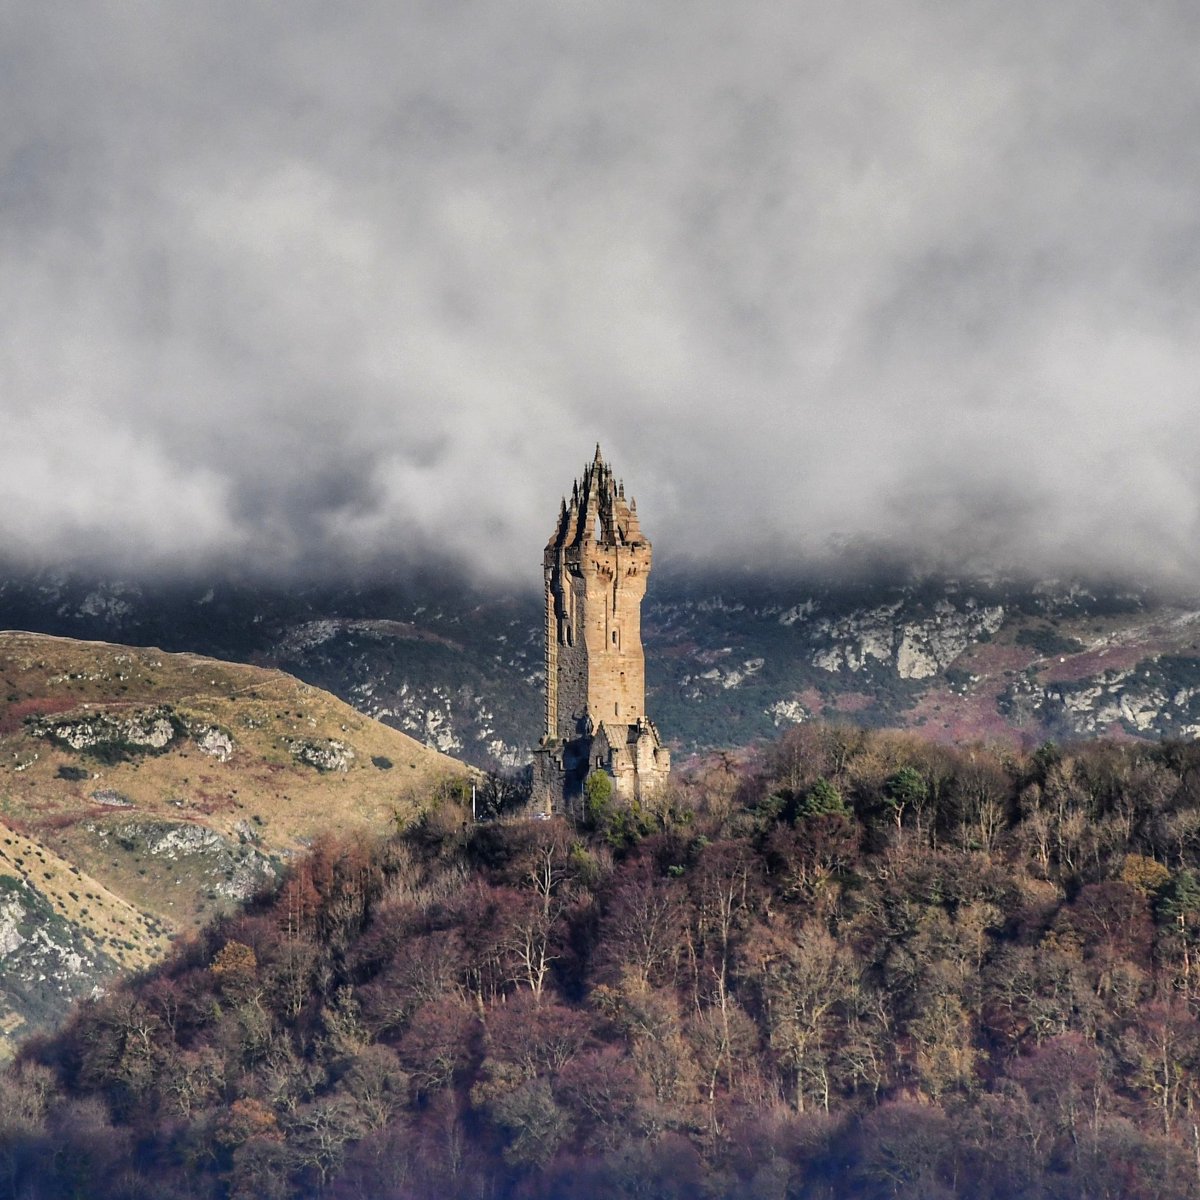 The Wallace Monument looking magnificent on this first proper wintry day ❄️😃 @TheWallaceMon @VisitScotland @walkhighlands @StirlingCouncil  #wallacemonument #williamwallace #stirling #bridgeofallan #ochilhills #dumyat #history #architecture #Scotland @RunComPod @NikonEurope